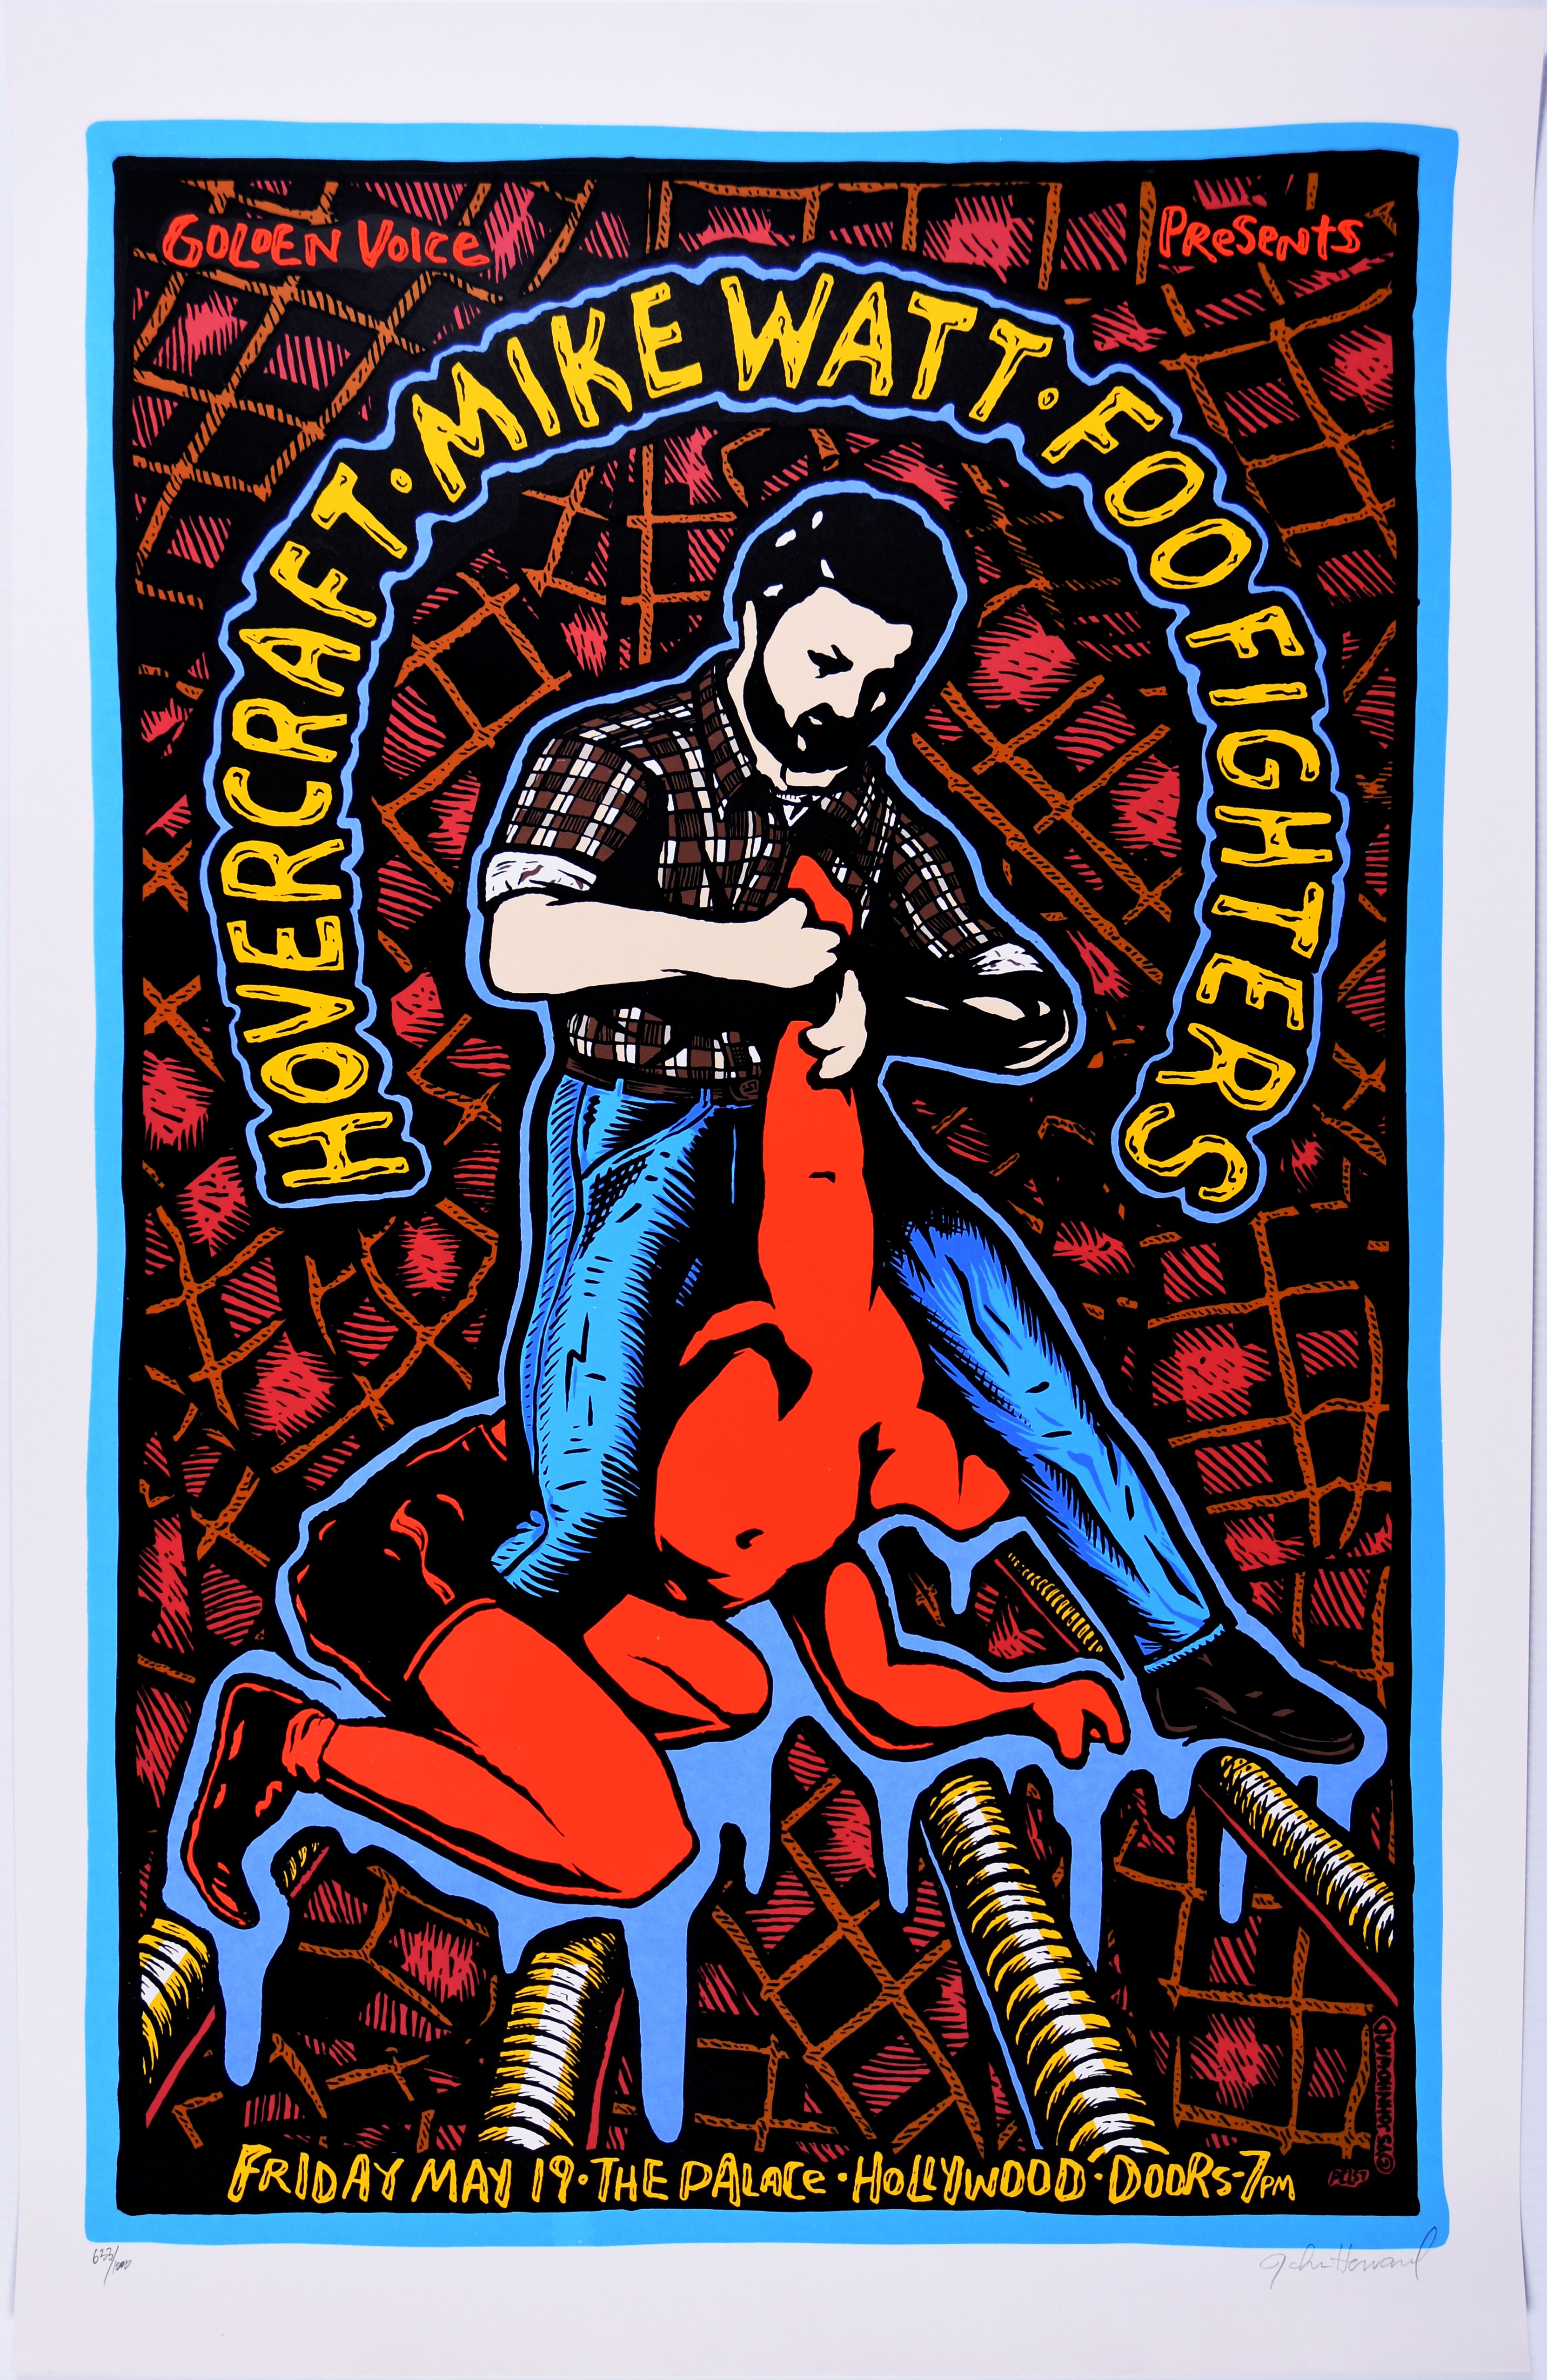 Foo Fighters with Mike Watt & Hovercraft (featuring Eddie Vedder) The Palace 1995 Concert Poster